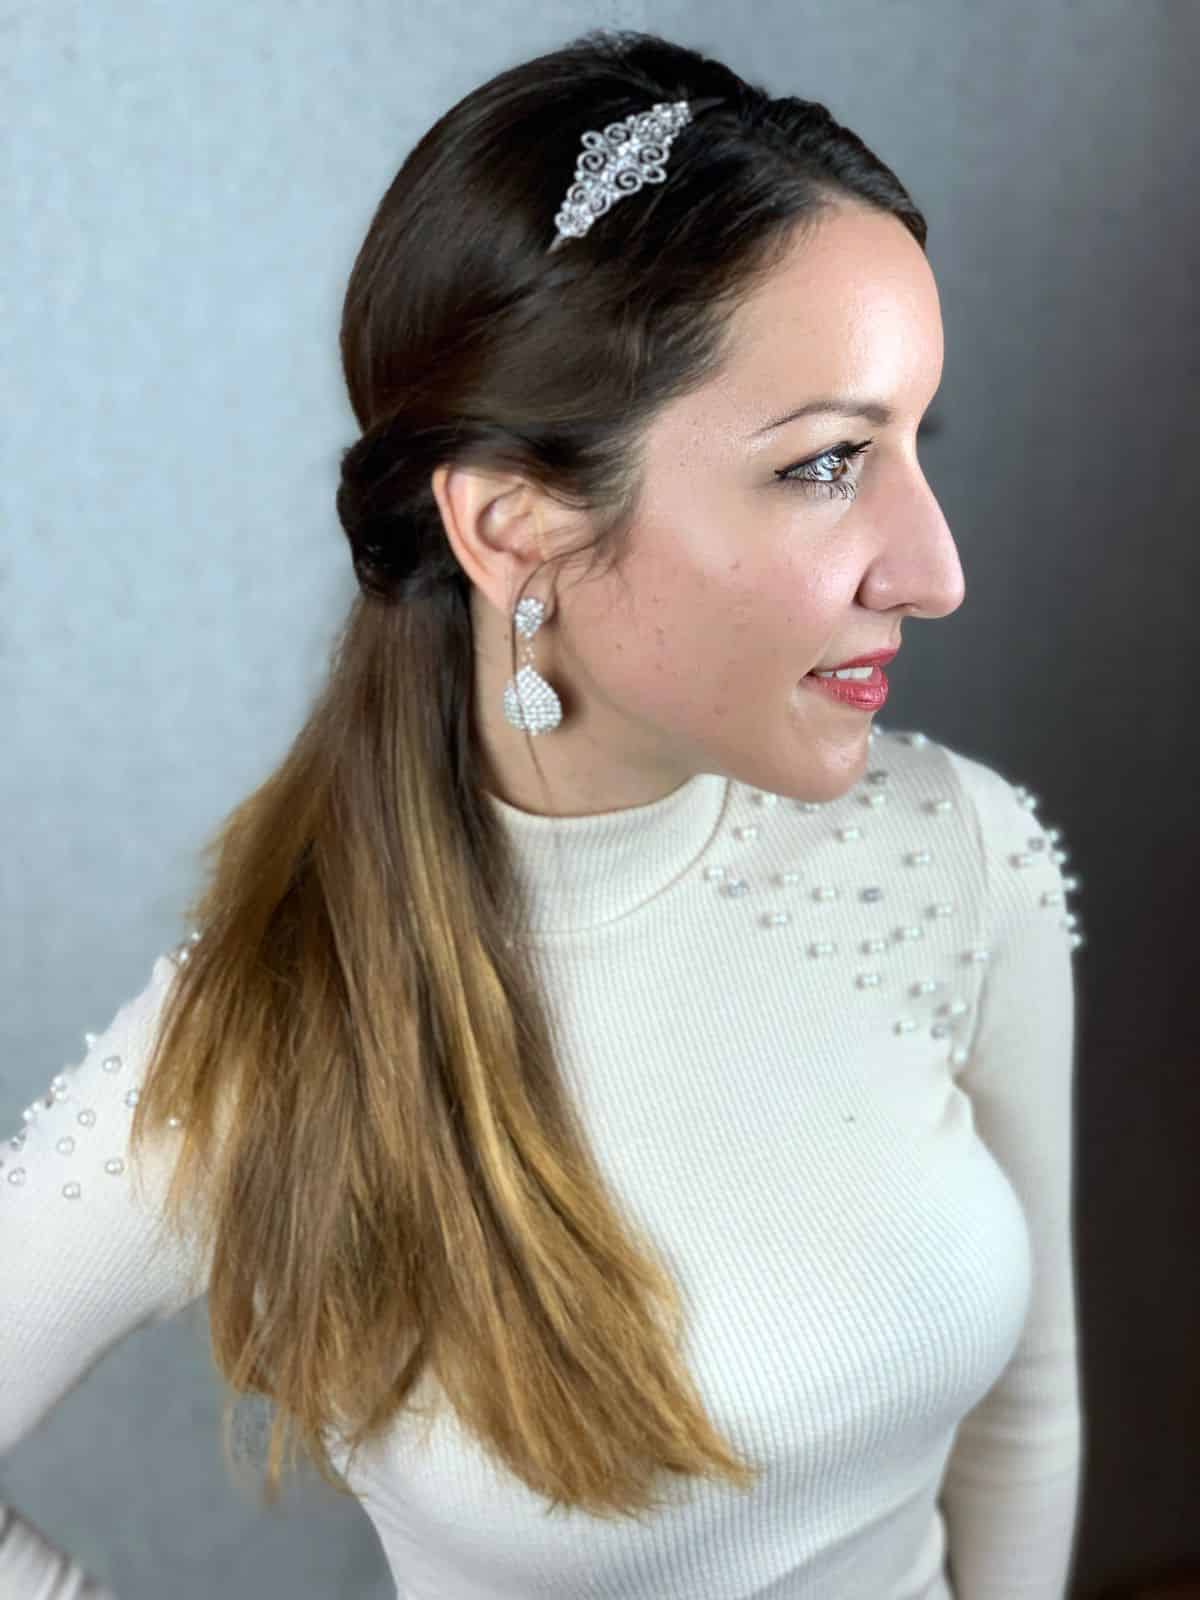 beaded headband on crown of head on woman in white sweater